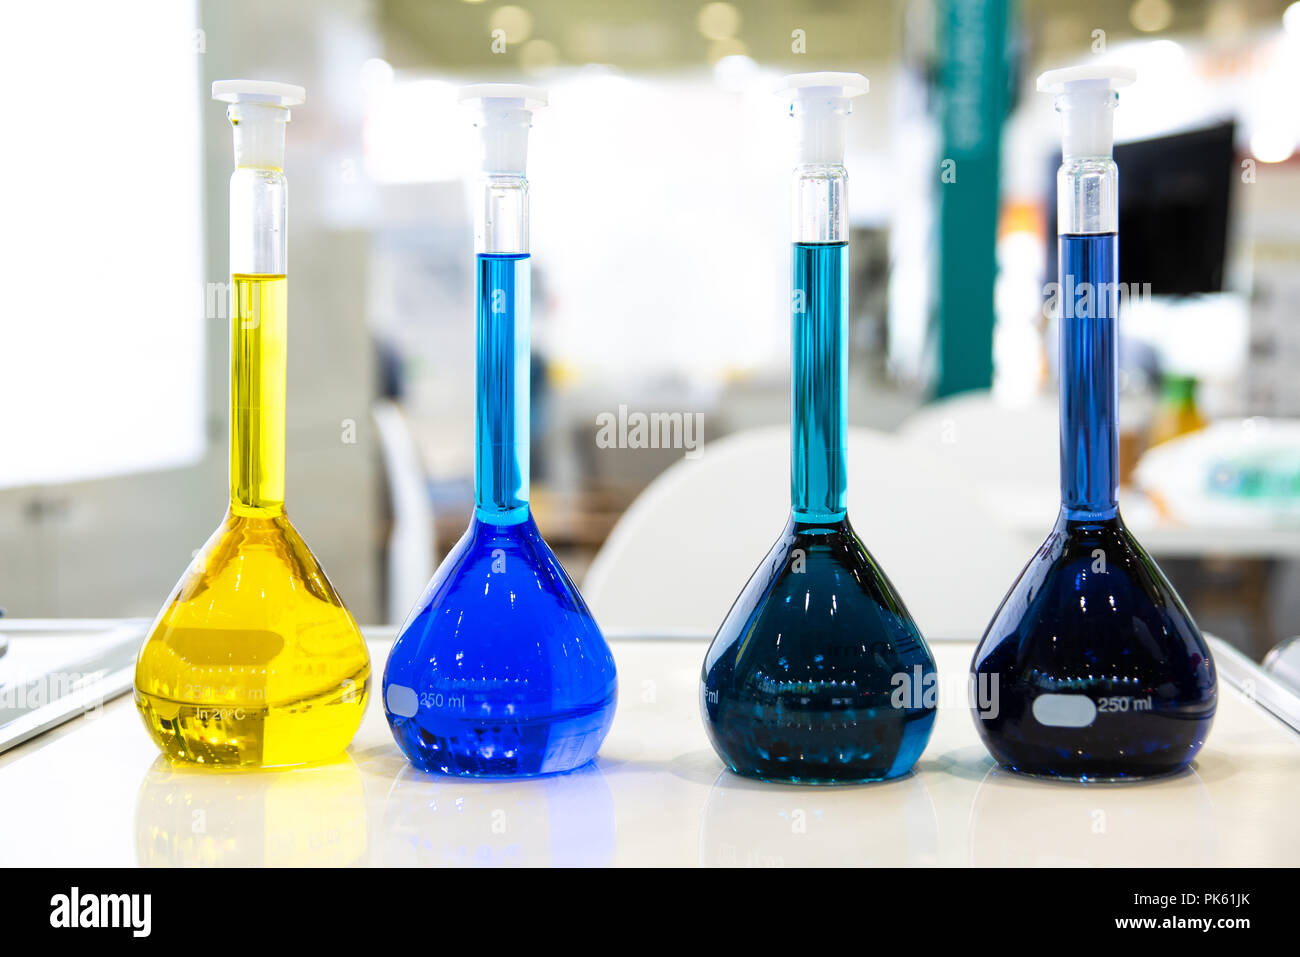 Laboratory equipment, lots of glass filled with colorful liquids. Stock Photo